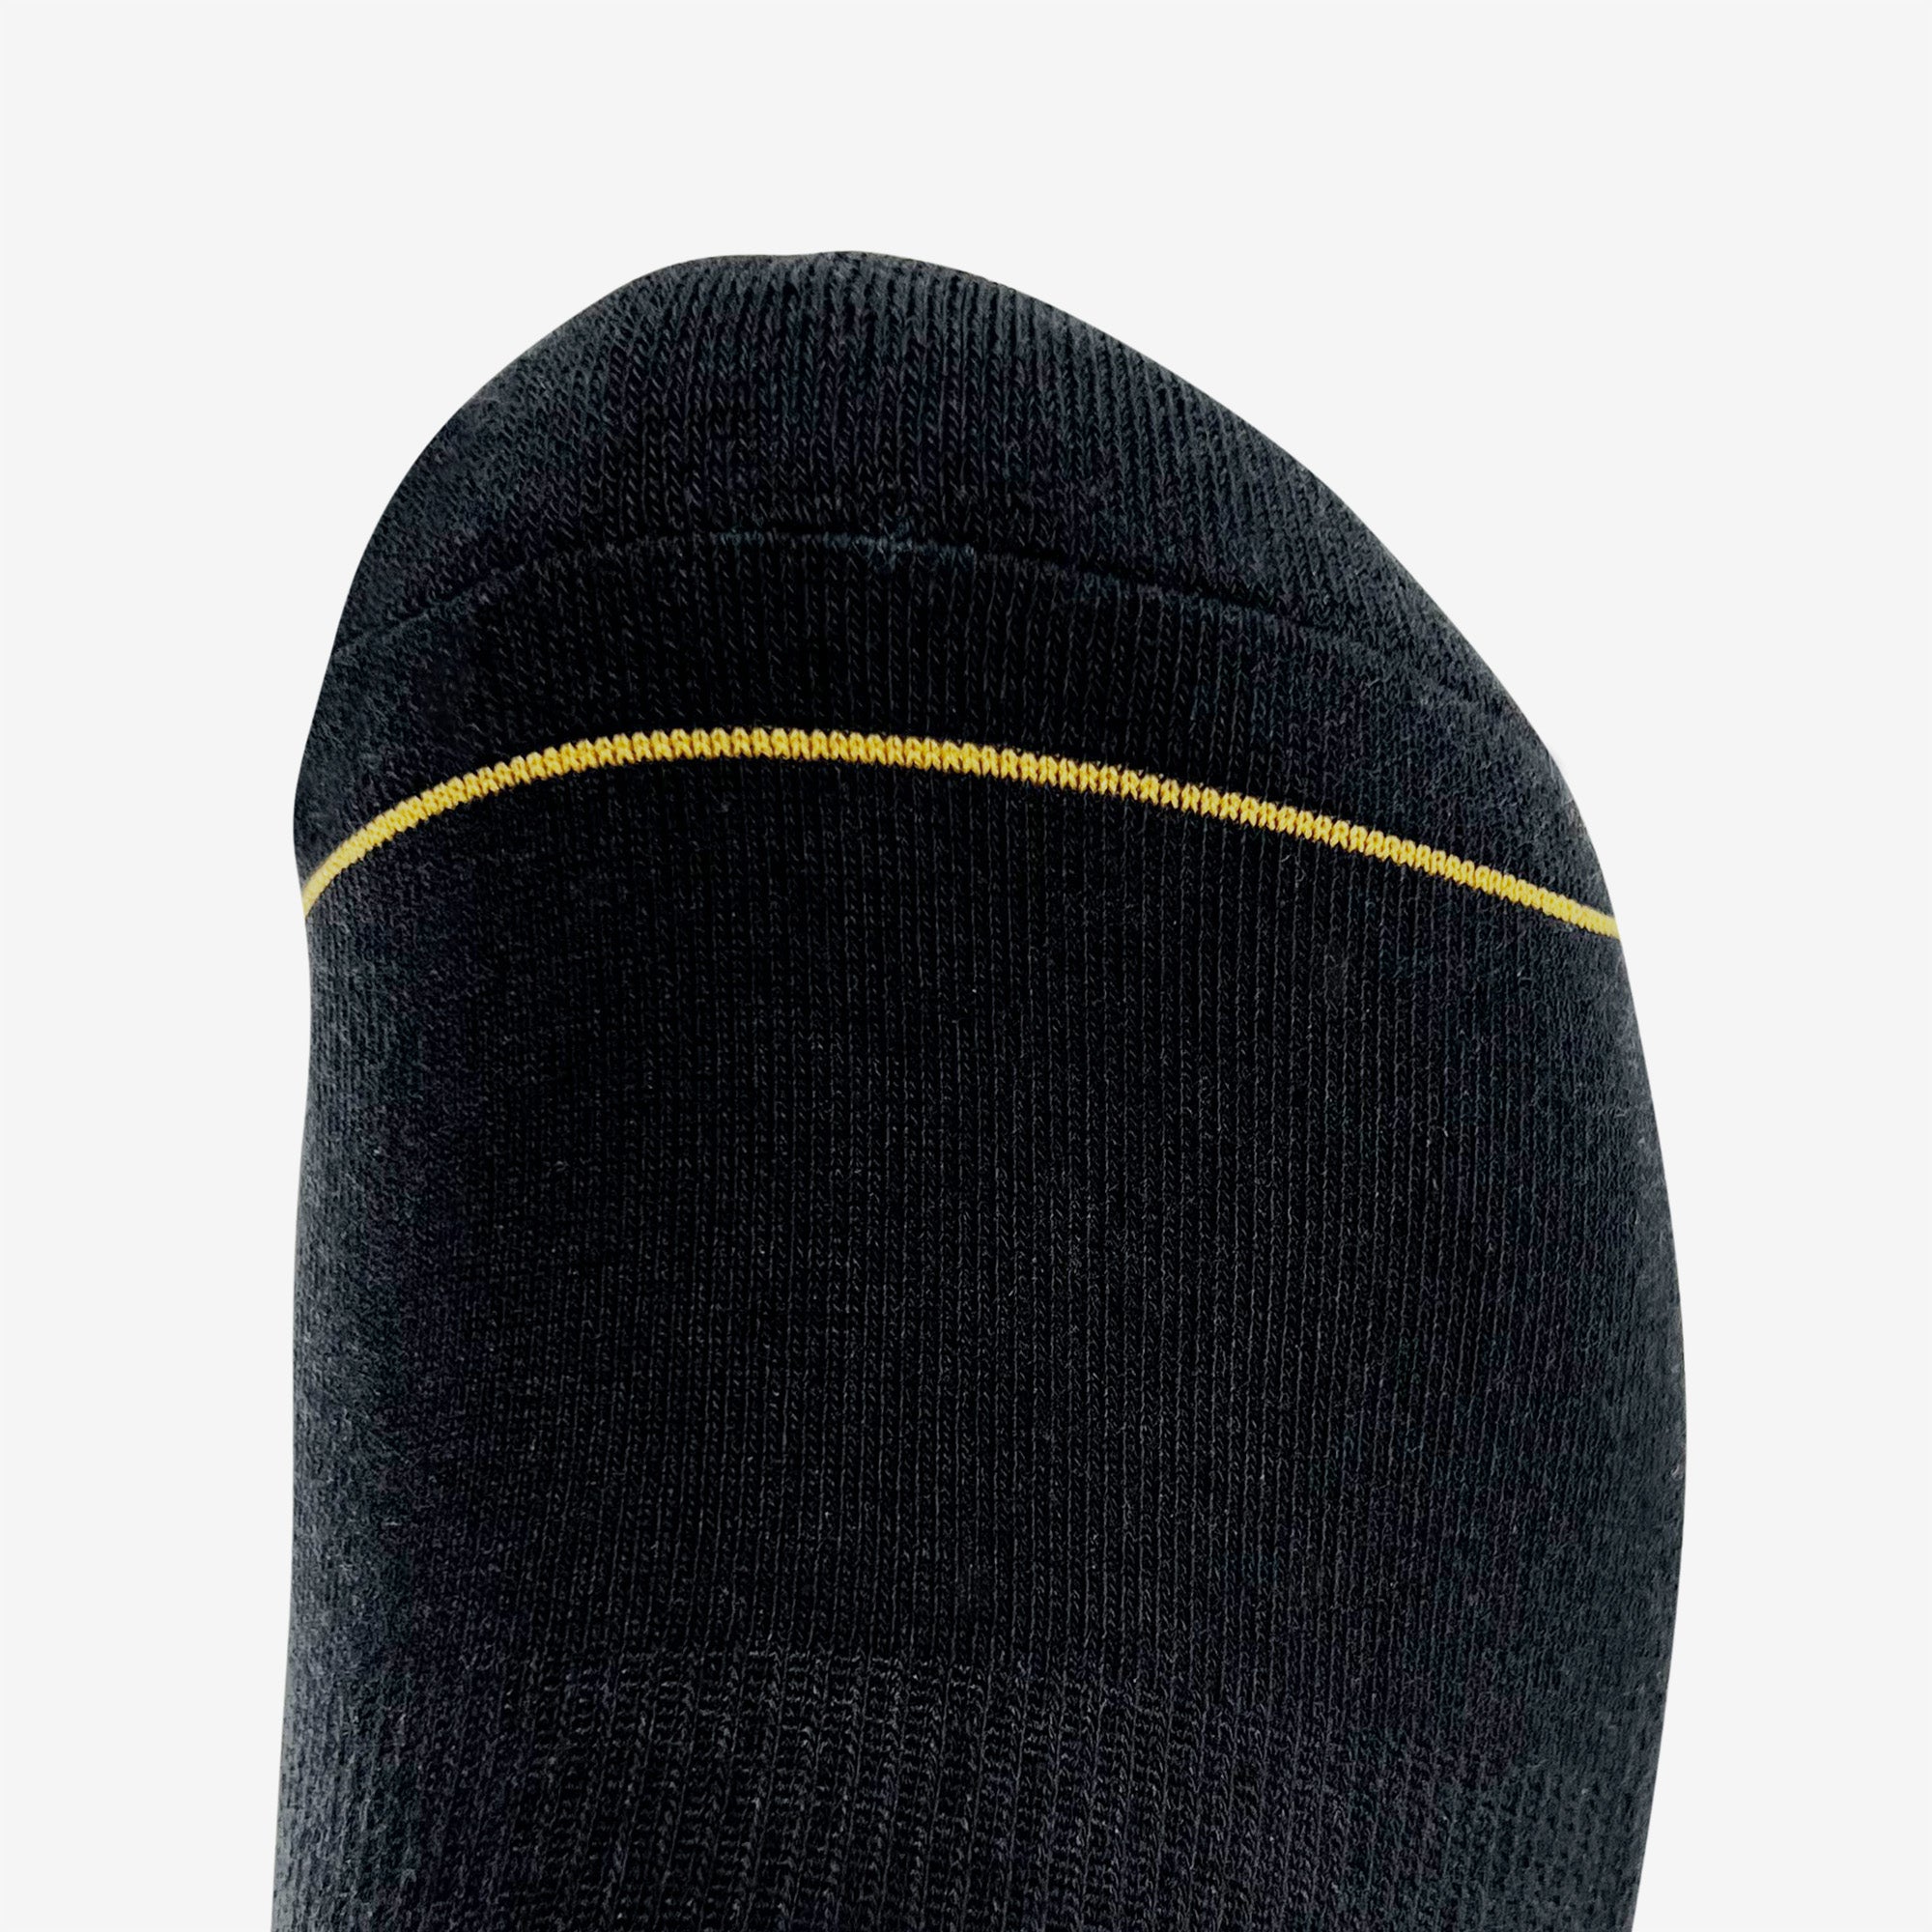 Close up of gold stripe on the toe of a black crew sock.